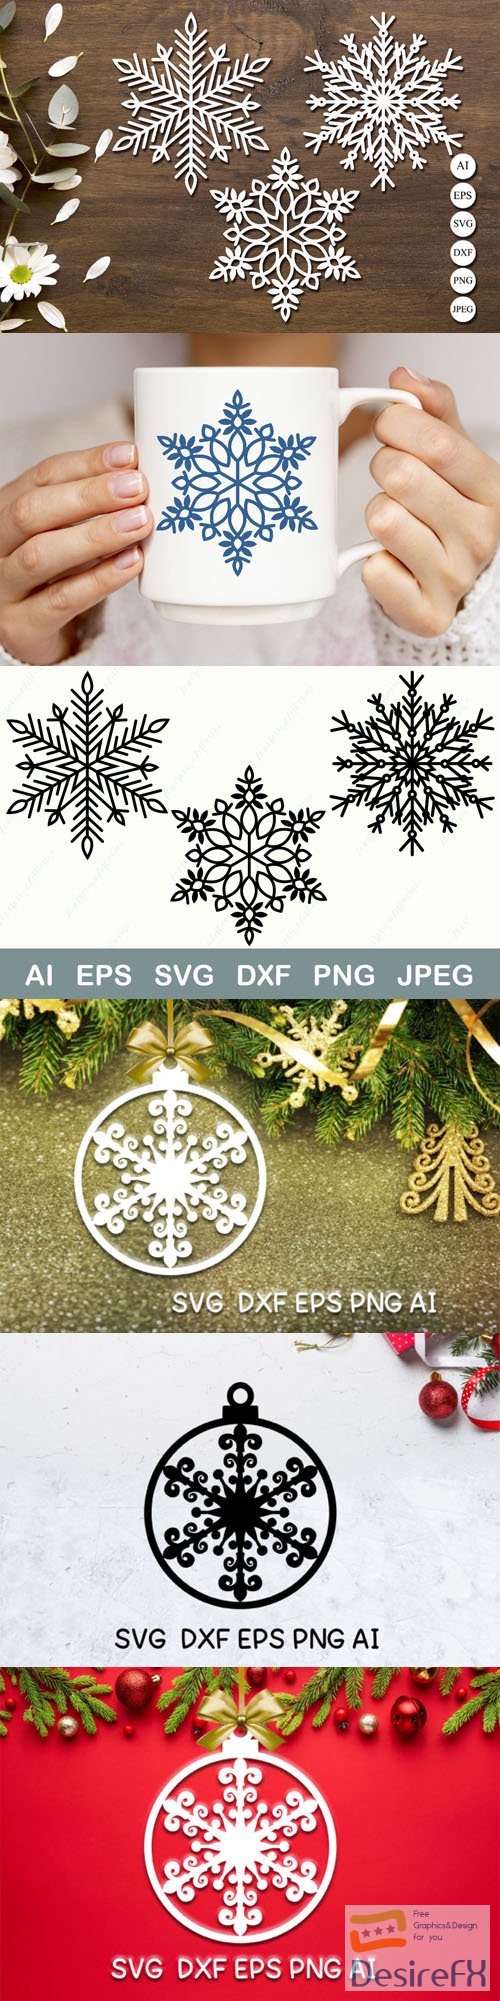 Snowflakes Ornament - SVG Laser Cut - Vector Collection